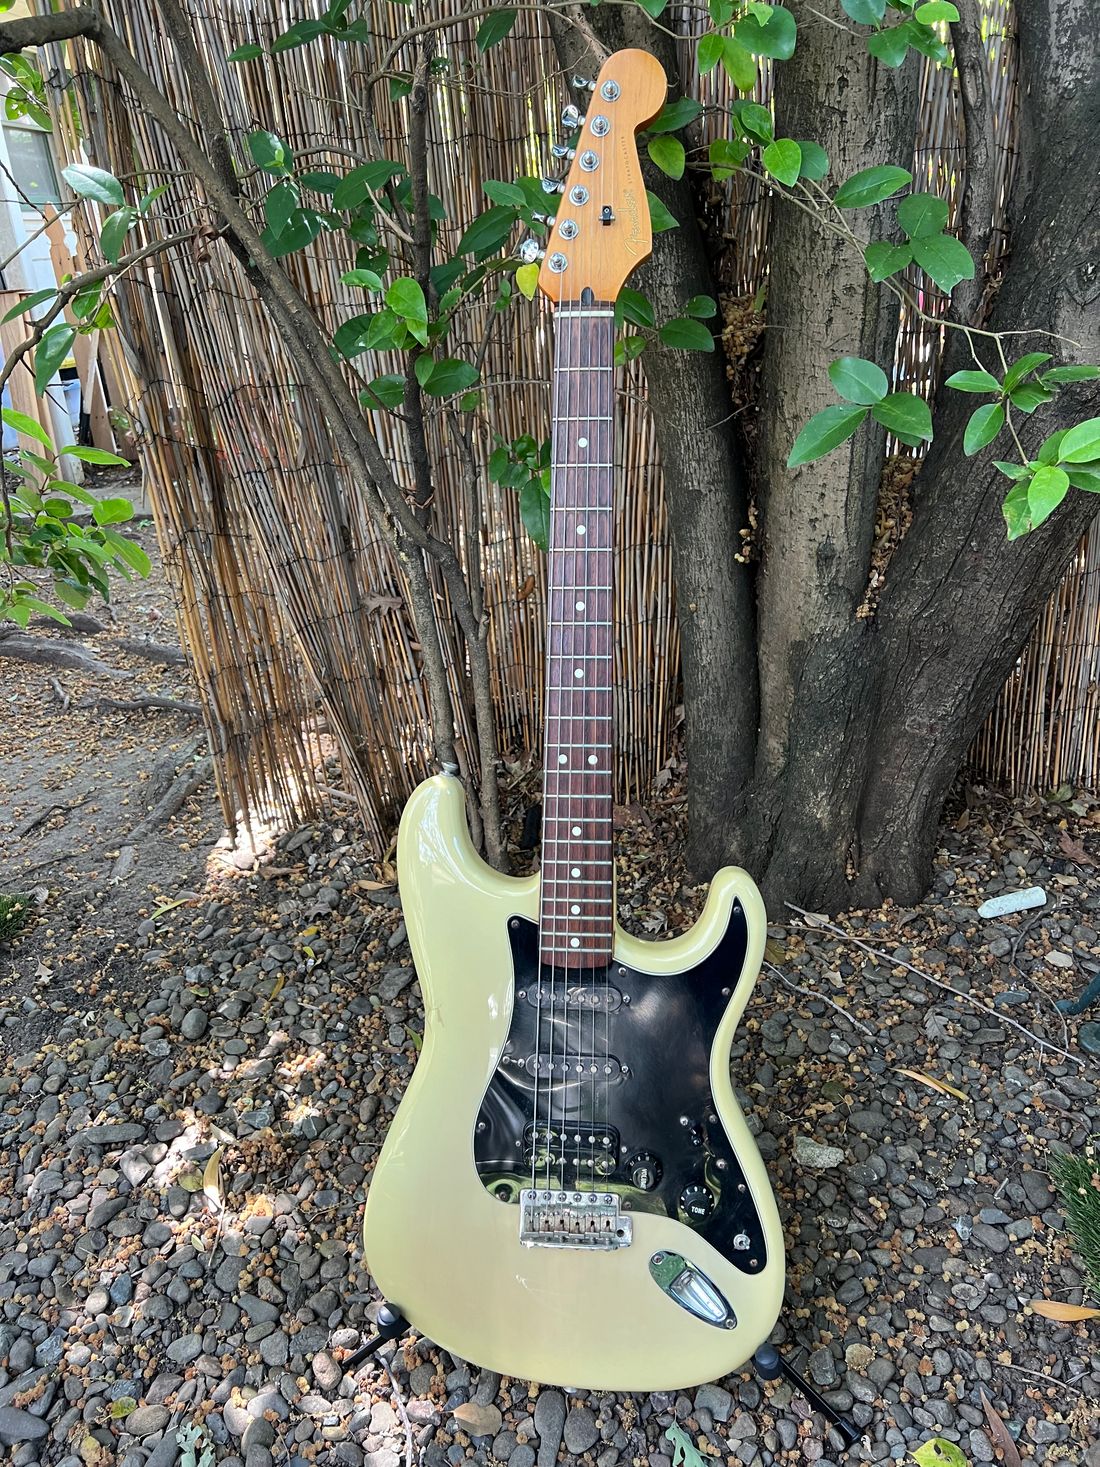 1992 Fender Stratocaster MIM. Garrick Davis main guitar from 1992 until 2015. Recorded on debut album "Glass Half Full"(2001), The Show (2005 live), "Expose Your Self" (2010).
SSH configuration - original humbucker replaced with one previously the property of Ronnie Montrose.
